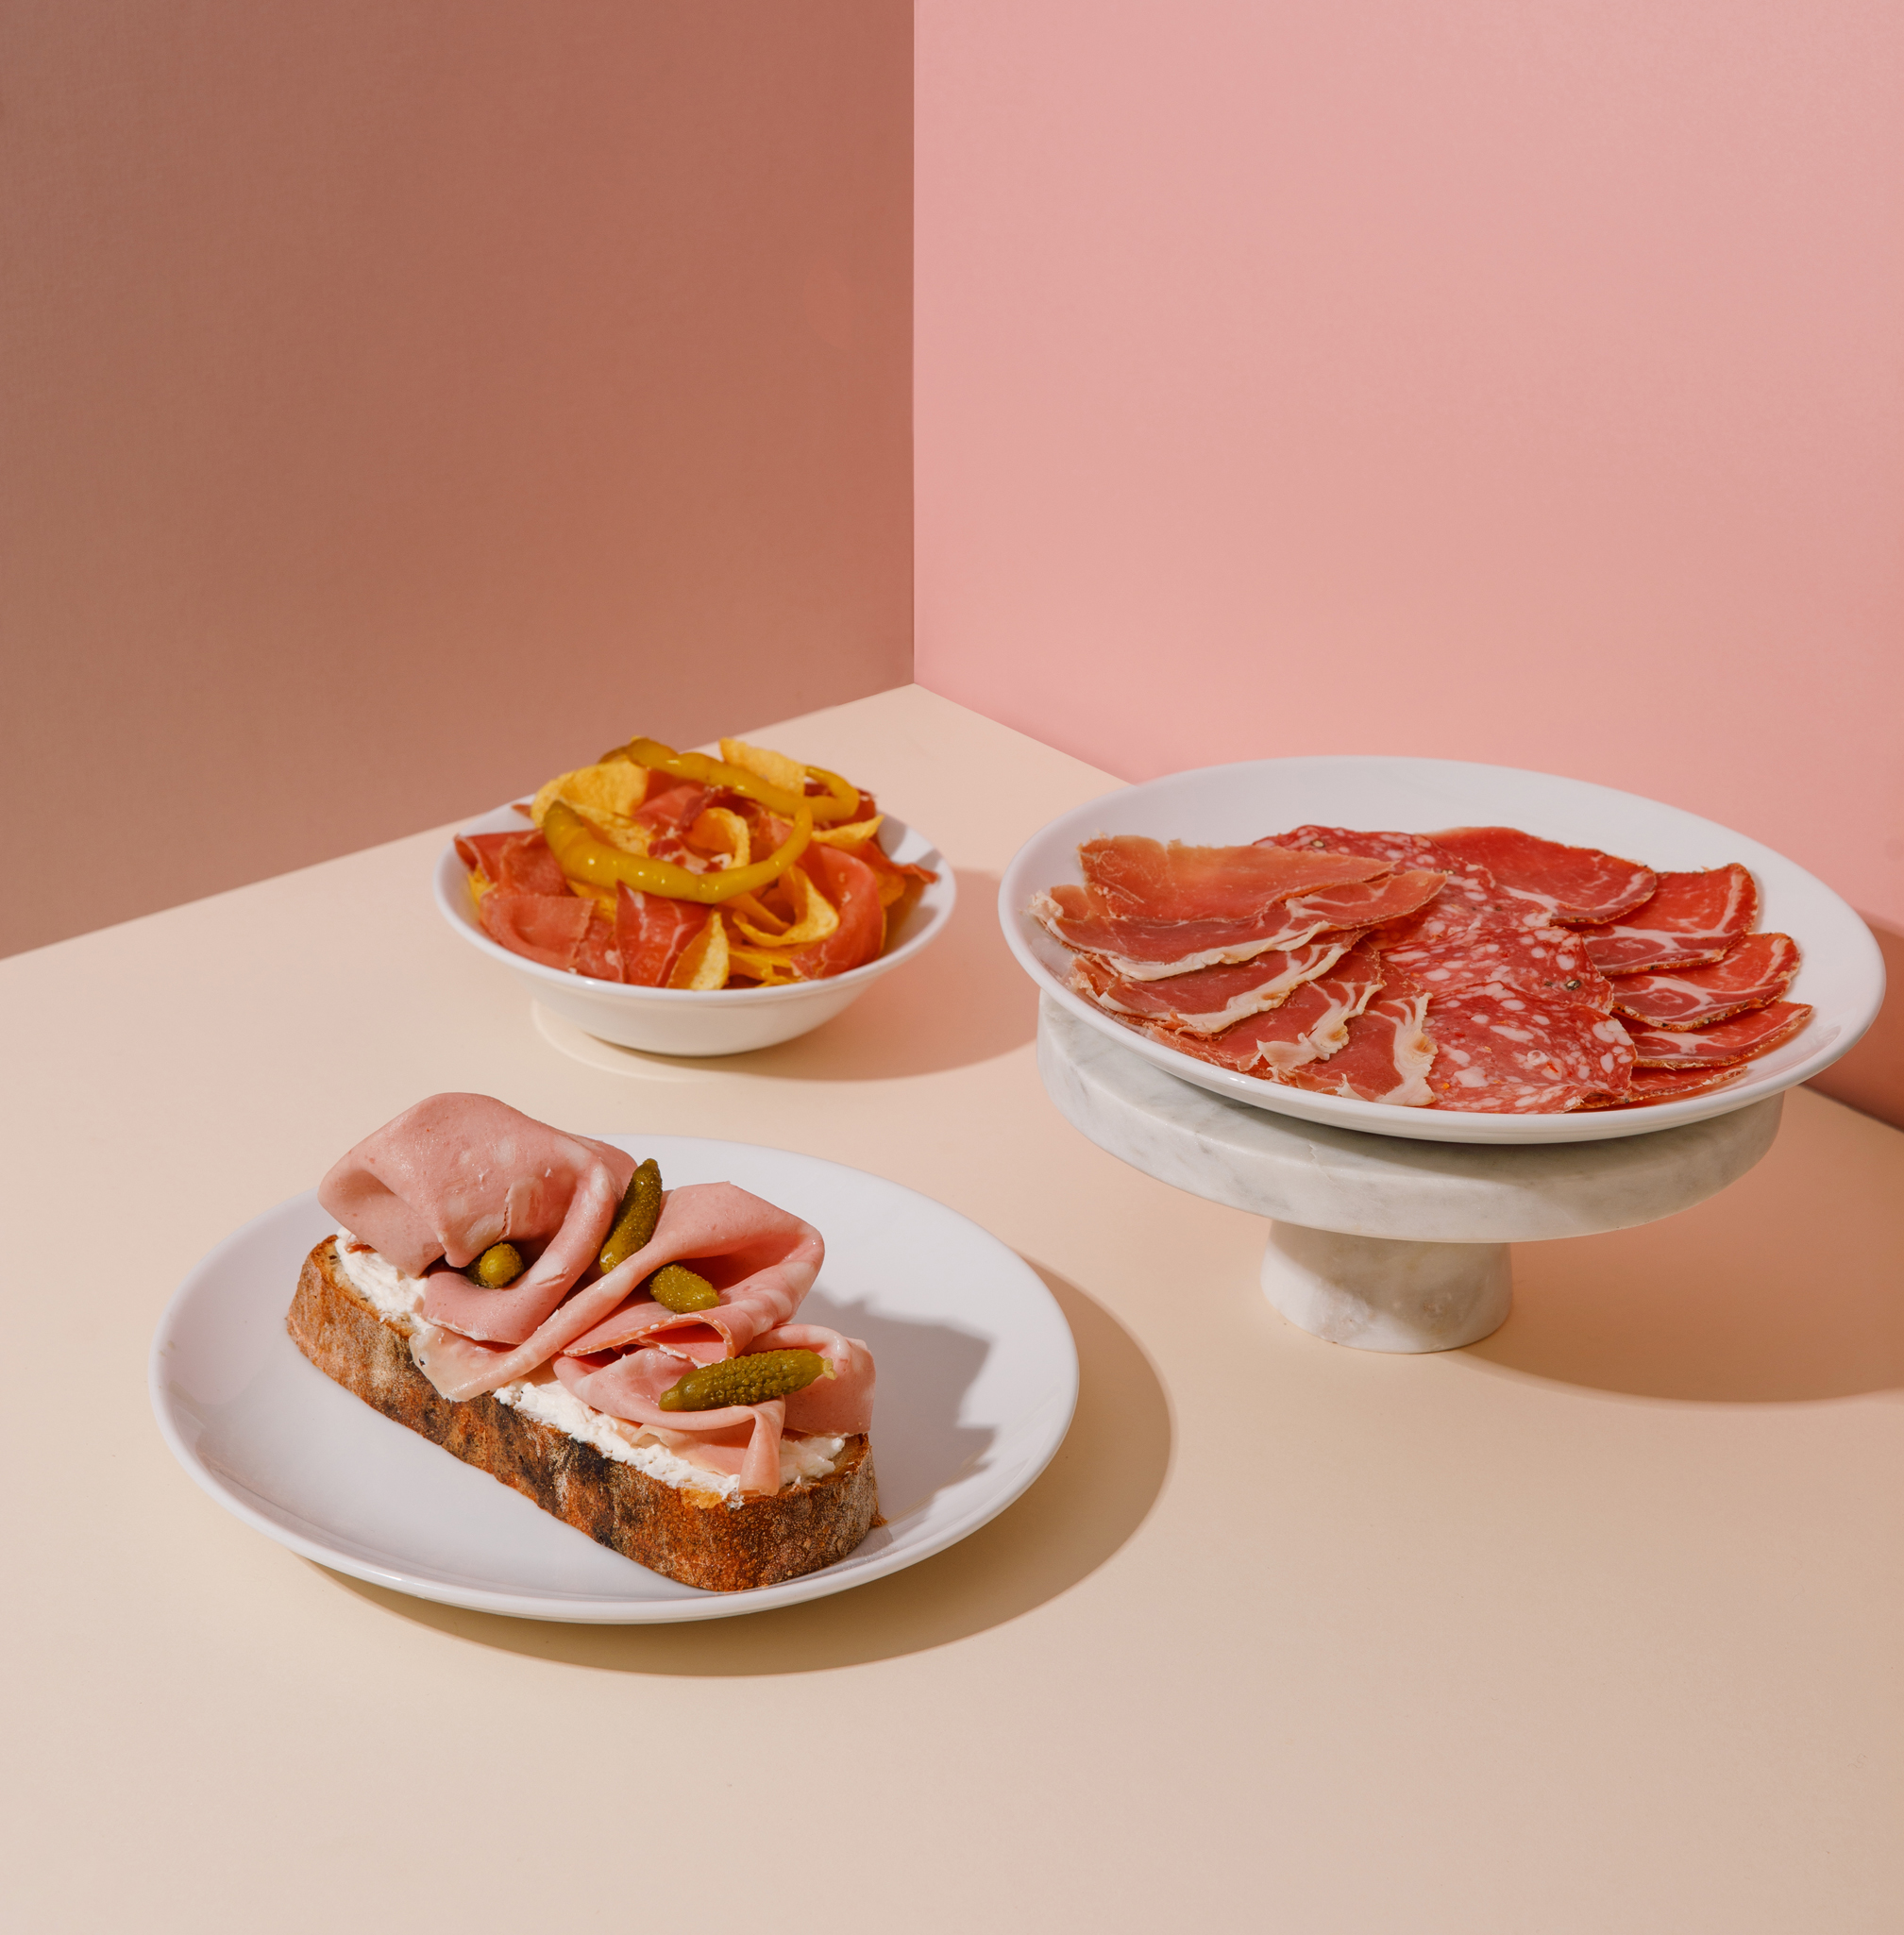 Scene of 3 plates of food on pink and mauve background. Plate of cured meats, a bowl of crisps and cured meats and a plate with mortadella on sourdough